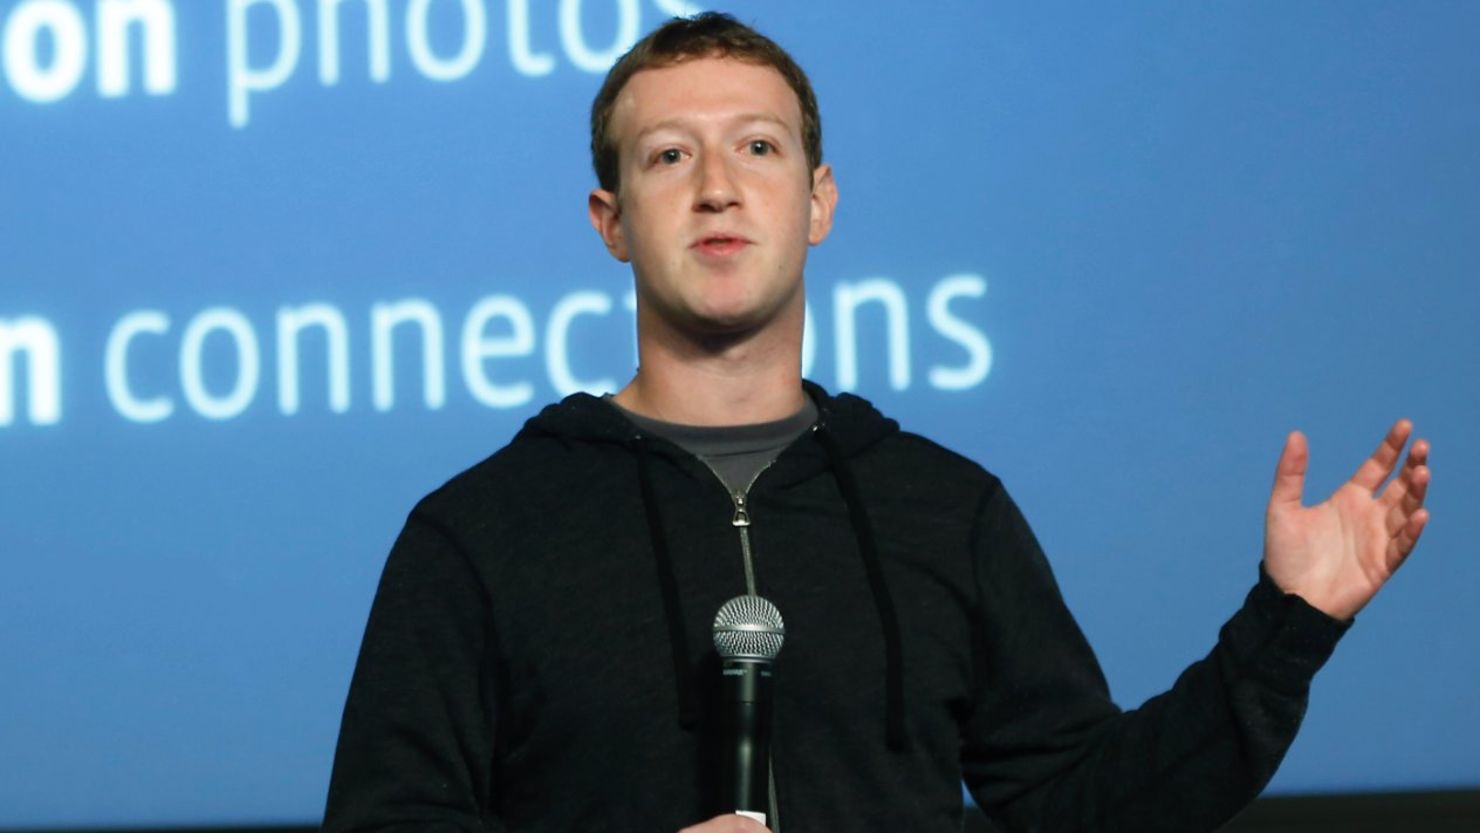 Facebook CEO Mark Zuckerberg introduces the company's new "Graph Search" tool at a press event Tuesday in California.